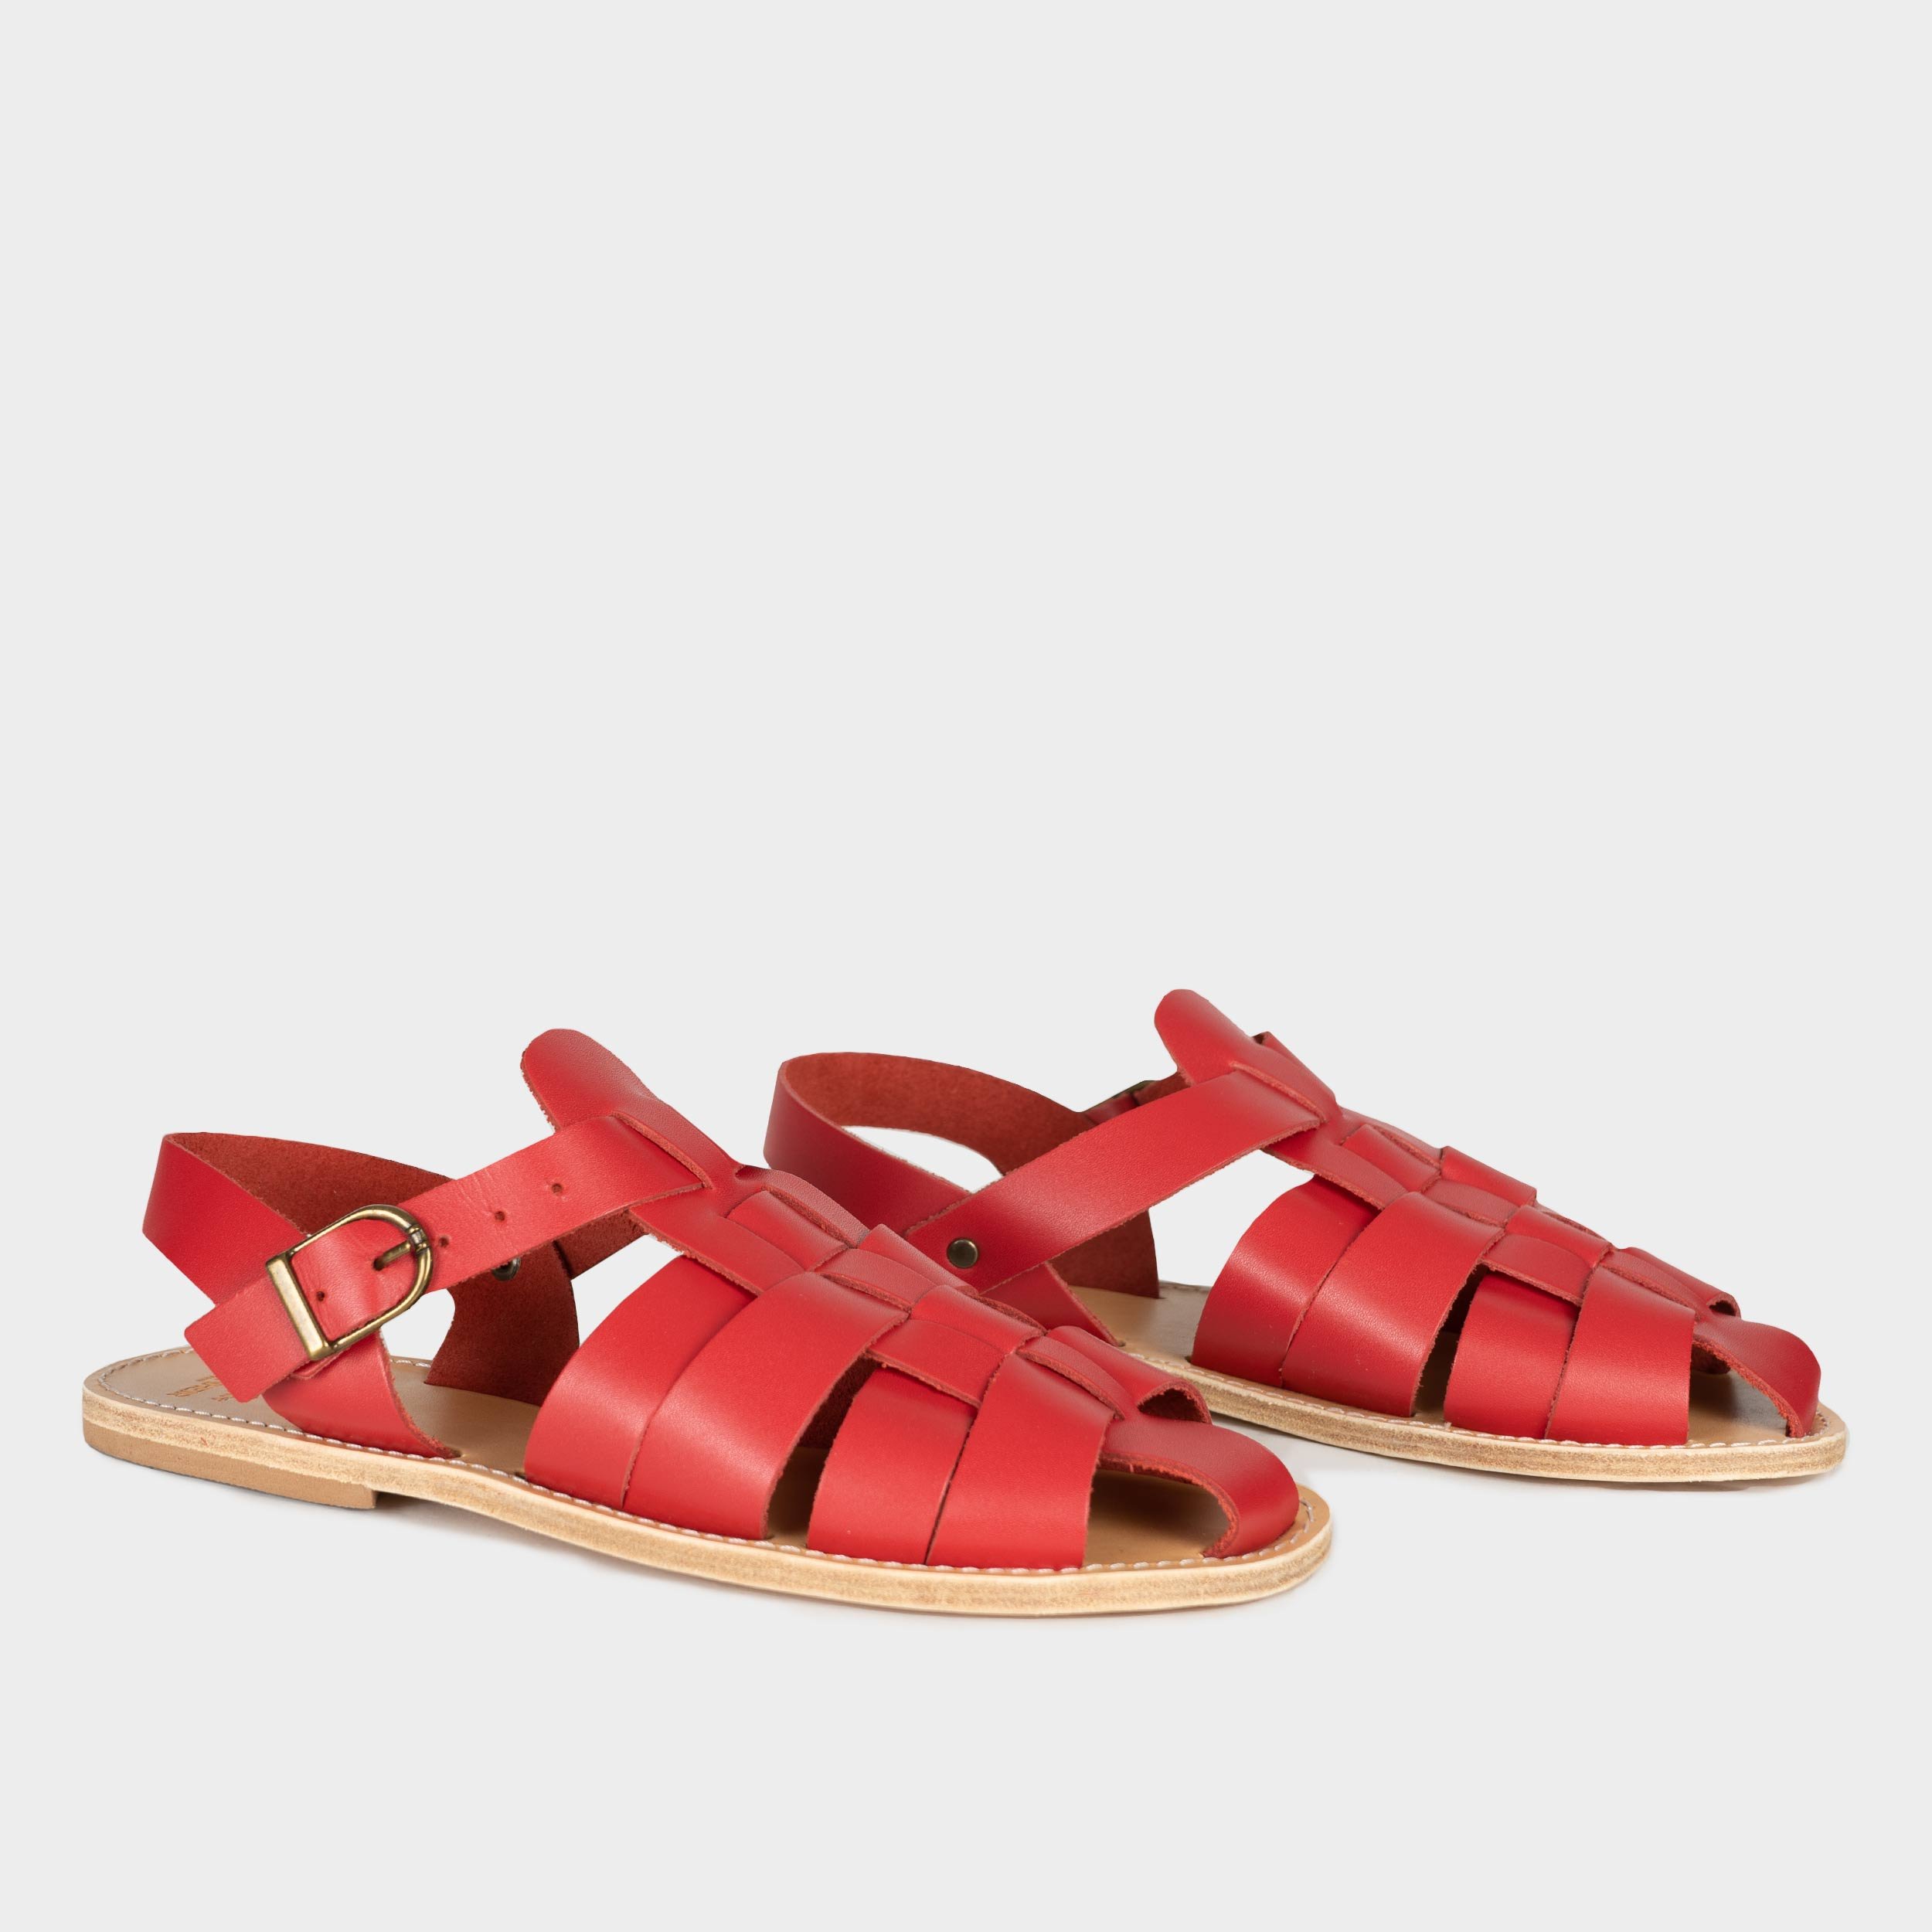 Leather Fisherman Sandals, French Fisherman Sandals, Red Leather ...